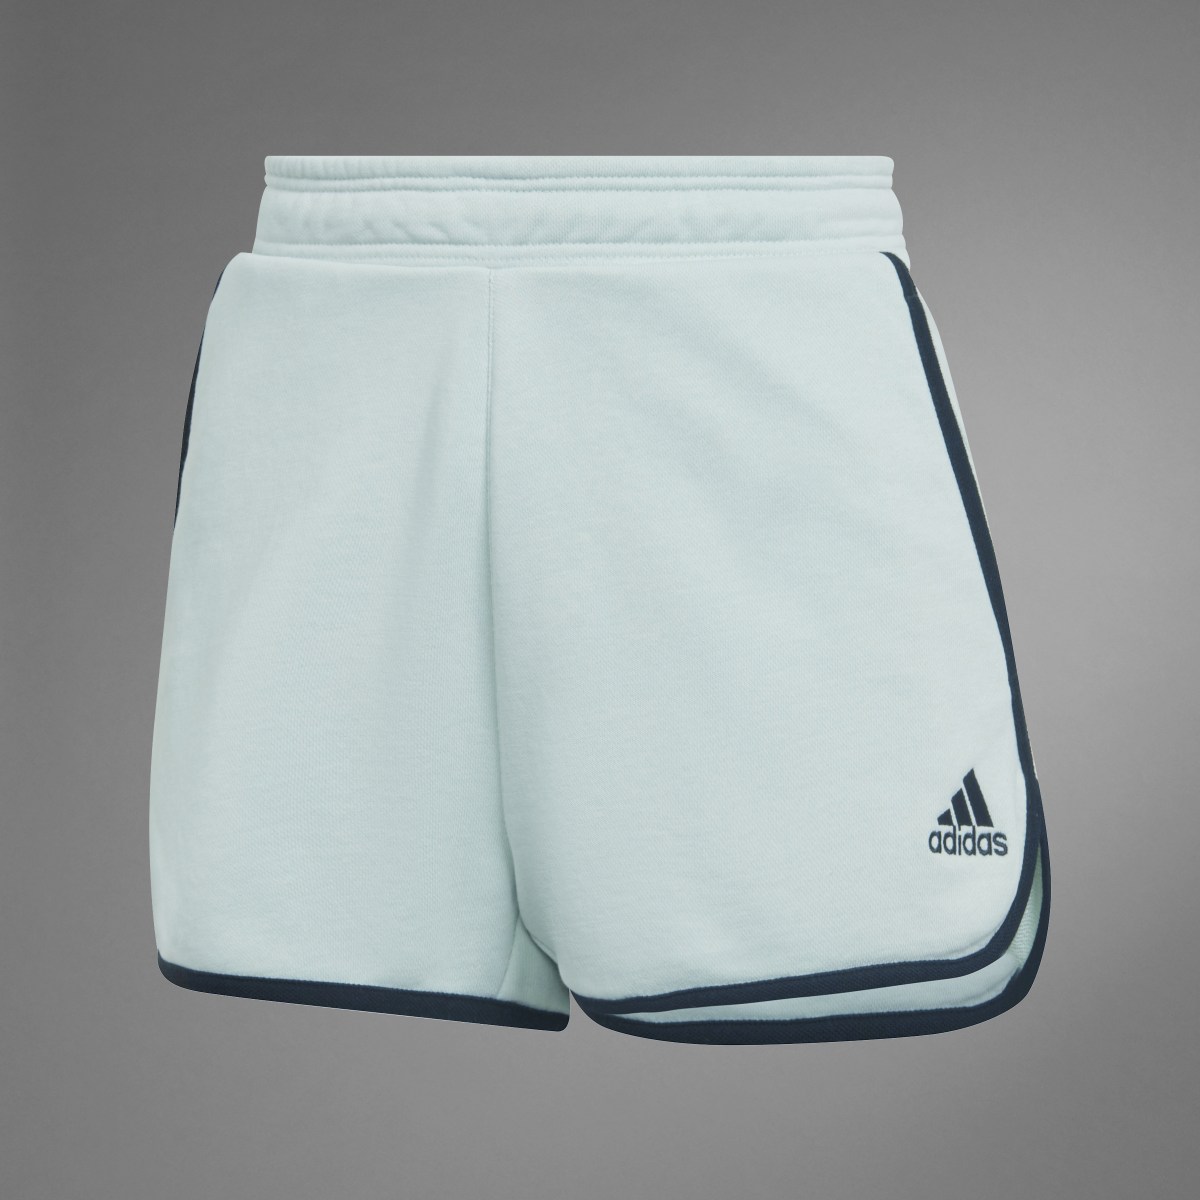 Adidas French Terry High-Rise Shorts. 10